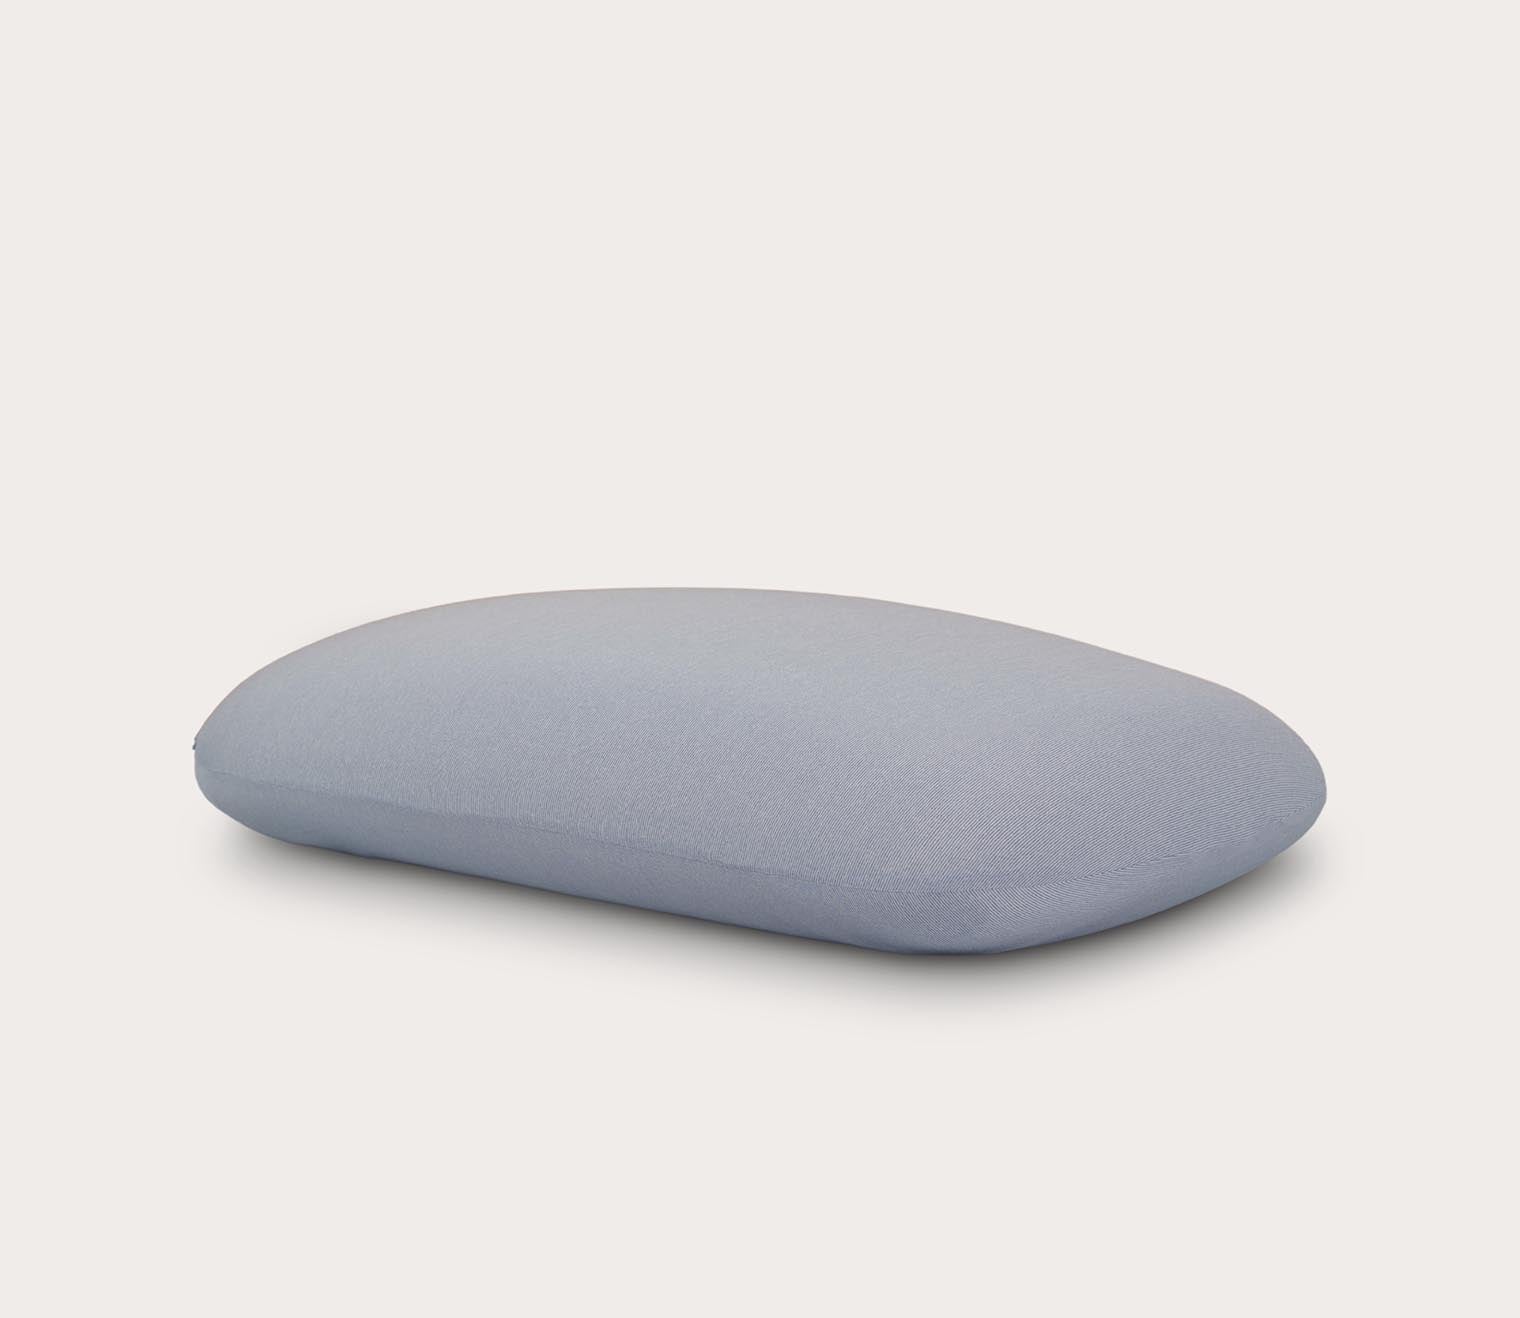 Cool Fit Hybrid Pillow by I Love My Pillow